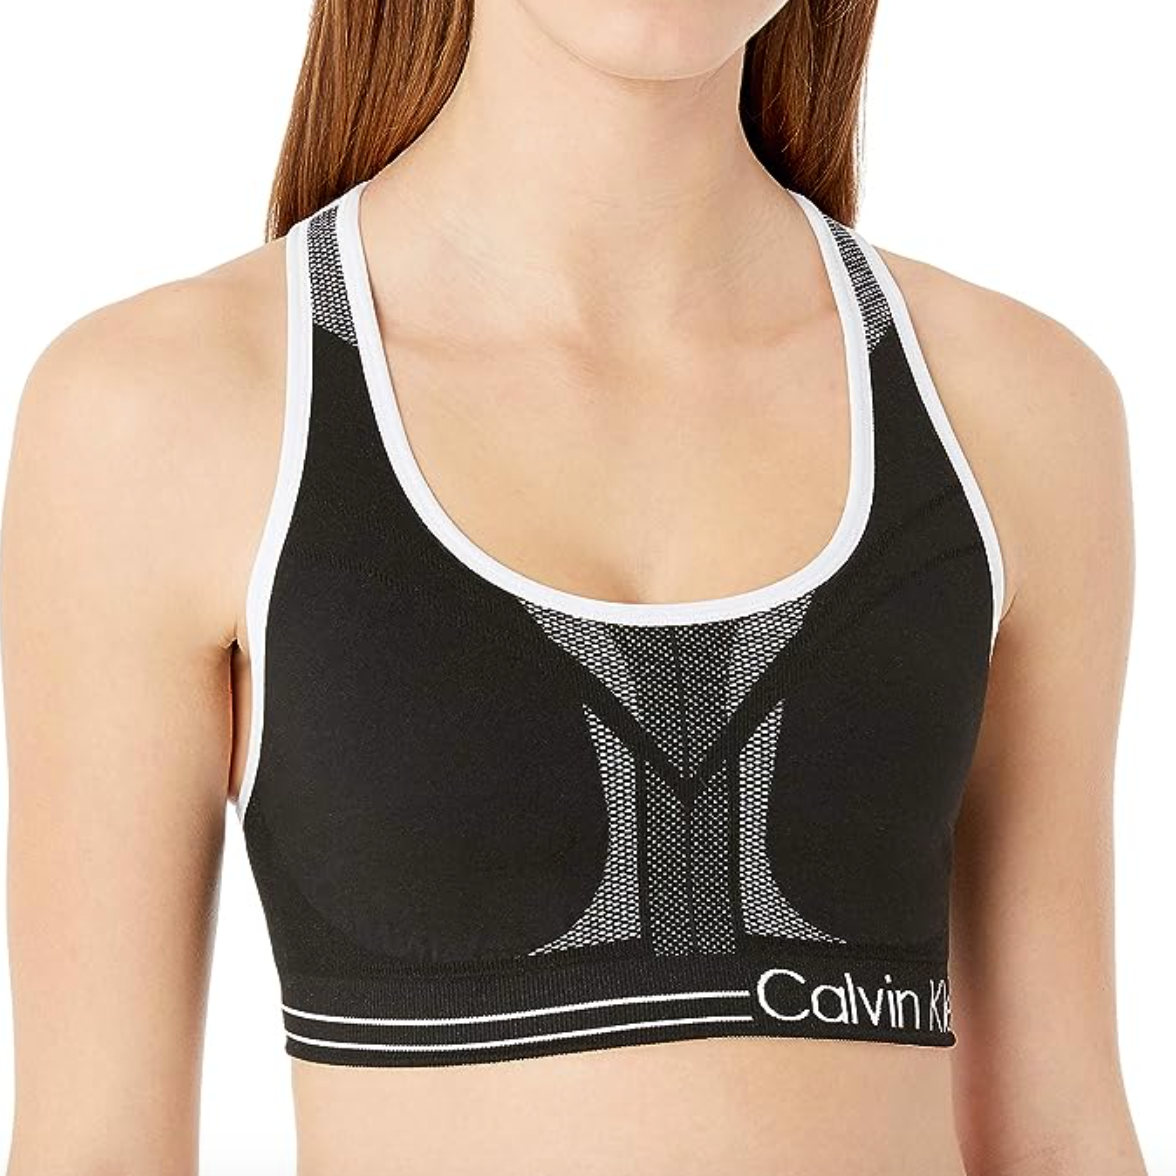 Calvin Klein\'s Iconic Underwear Up Off Is 60% at and Women | Now Amazon for Entertainment Right to Tonight Men